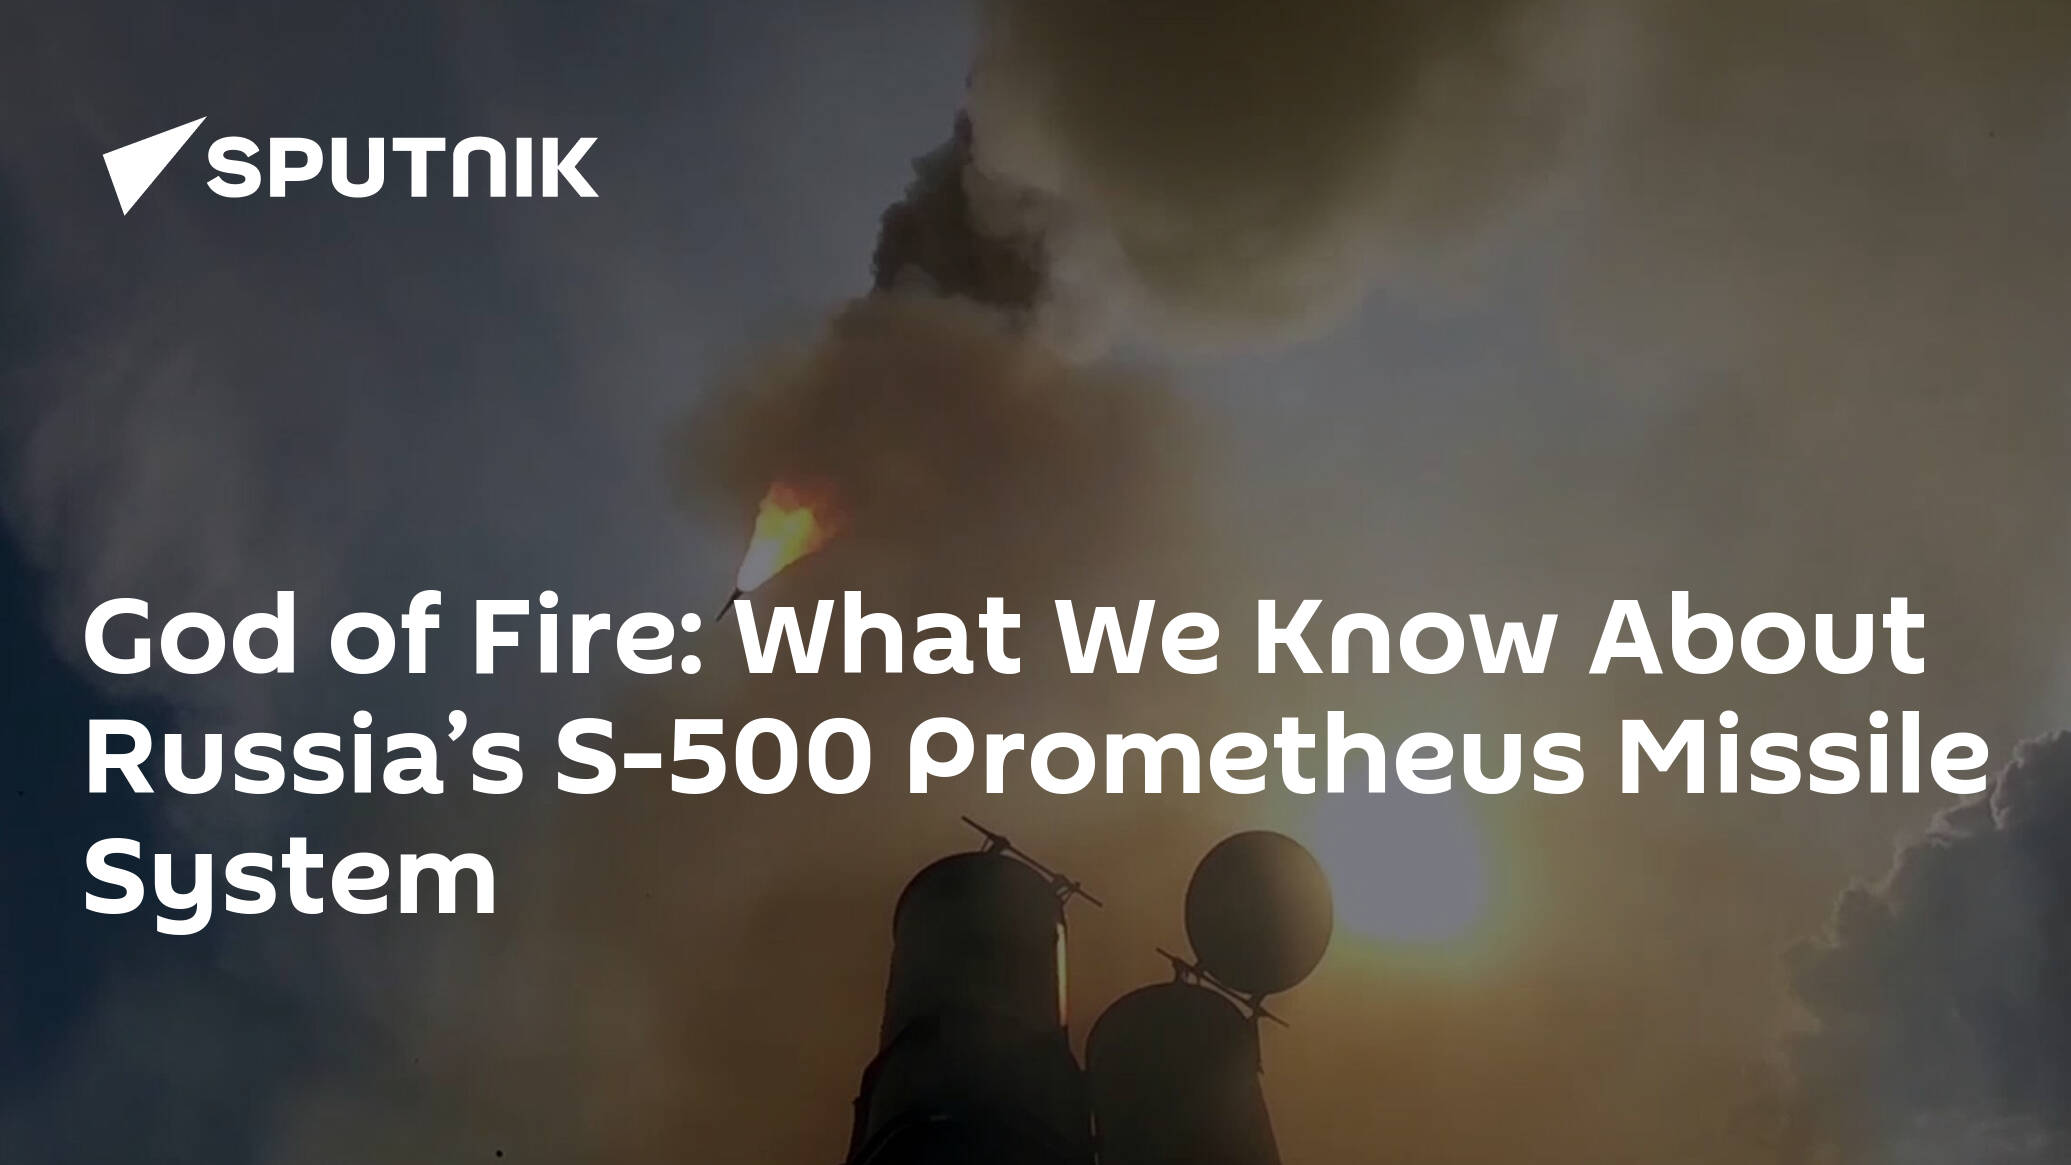 God of Fire: What We Know About Russia’s S-500 Prometheus Missile System